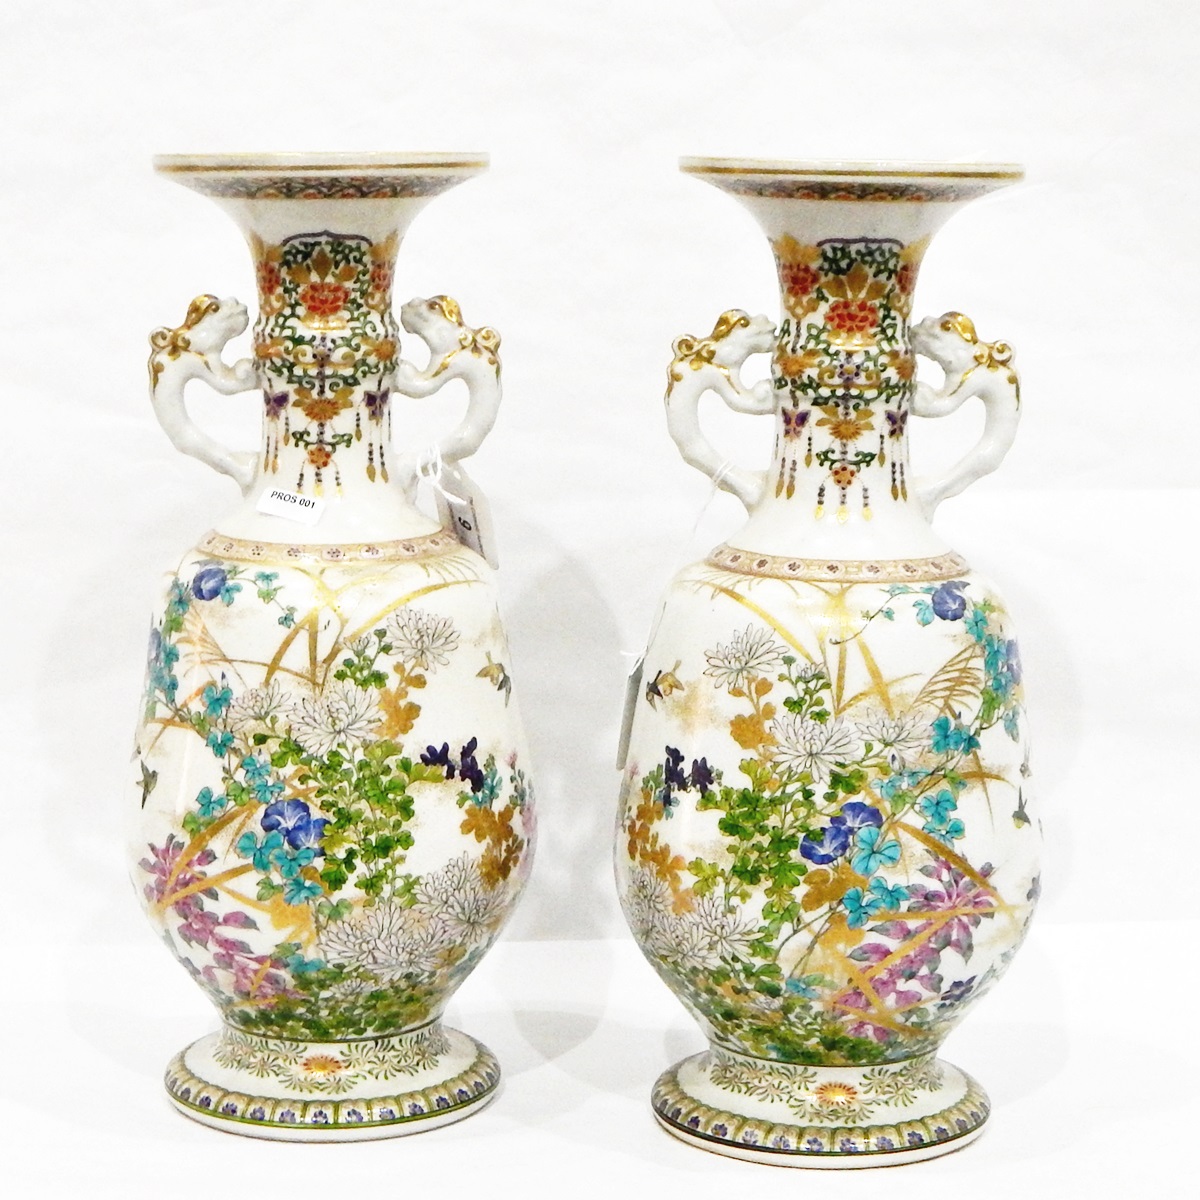 Pair of Japanese Meiji period porcelain vases, probably Kinkozan, each footed,